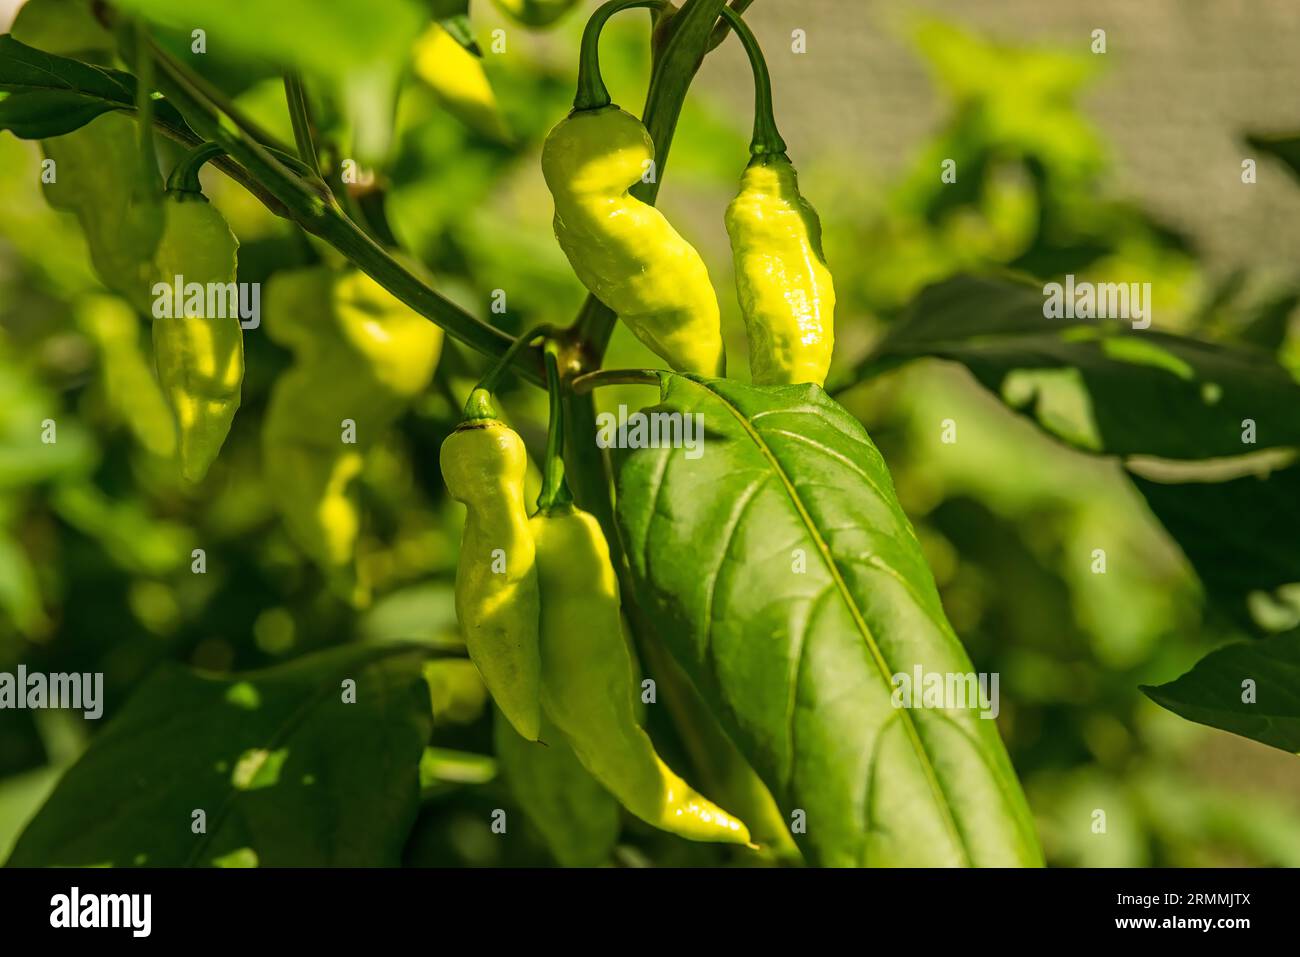 The ghost pepper Bhut Jolokoa with yellow variation, ripening fruits Stock Photo